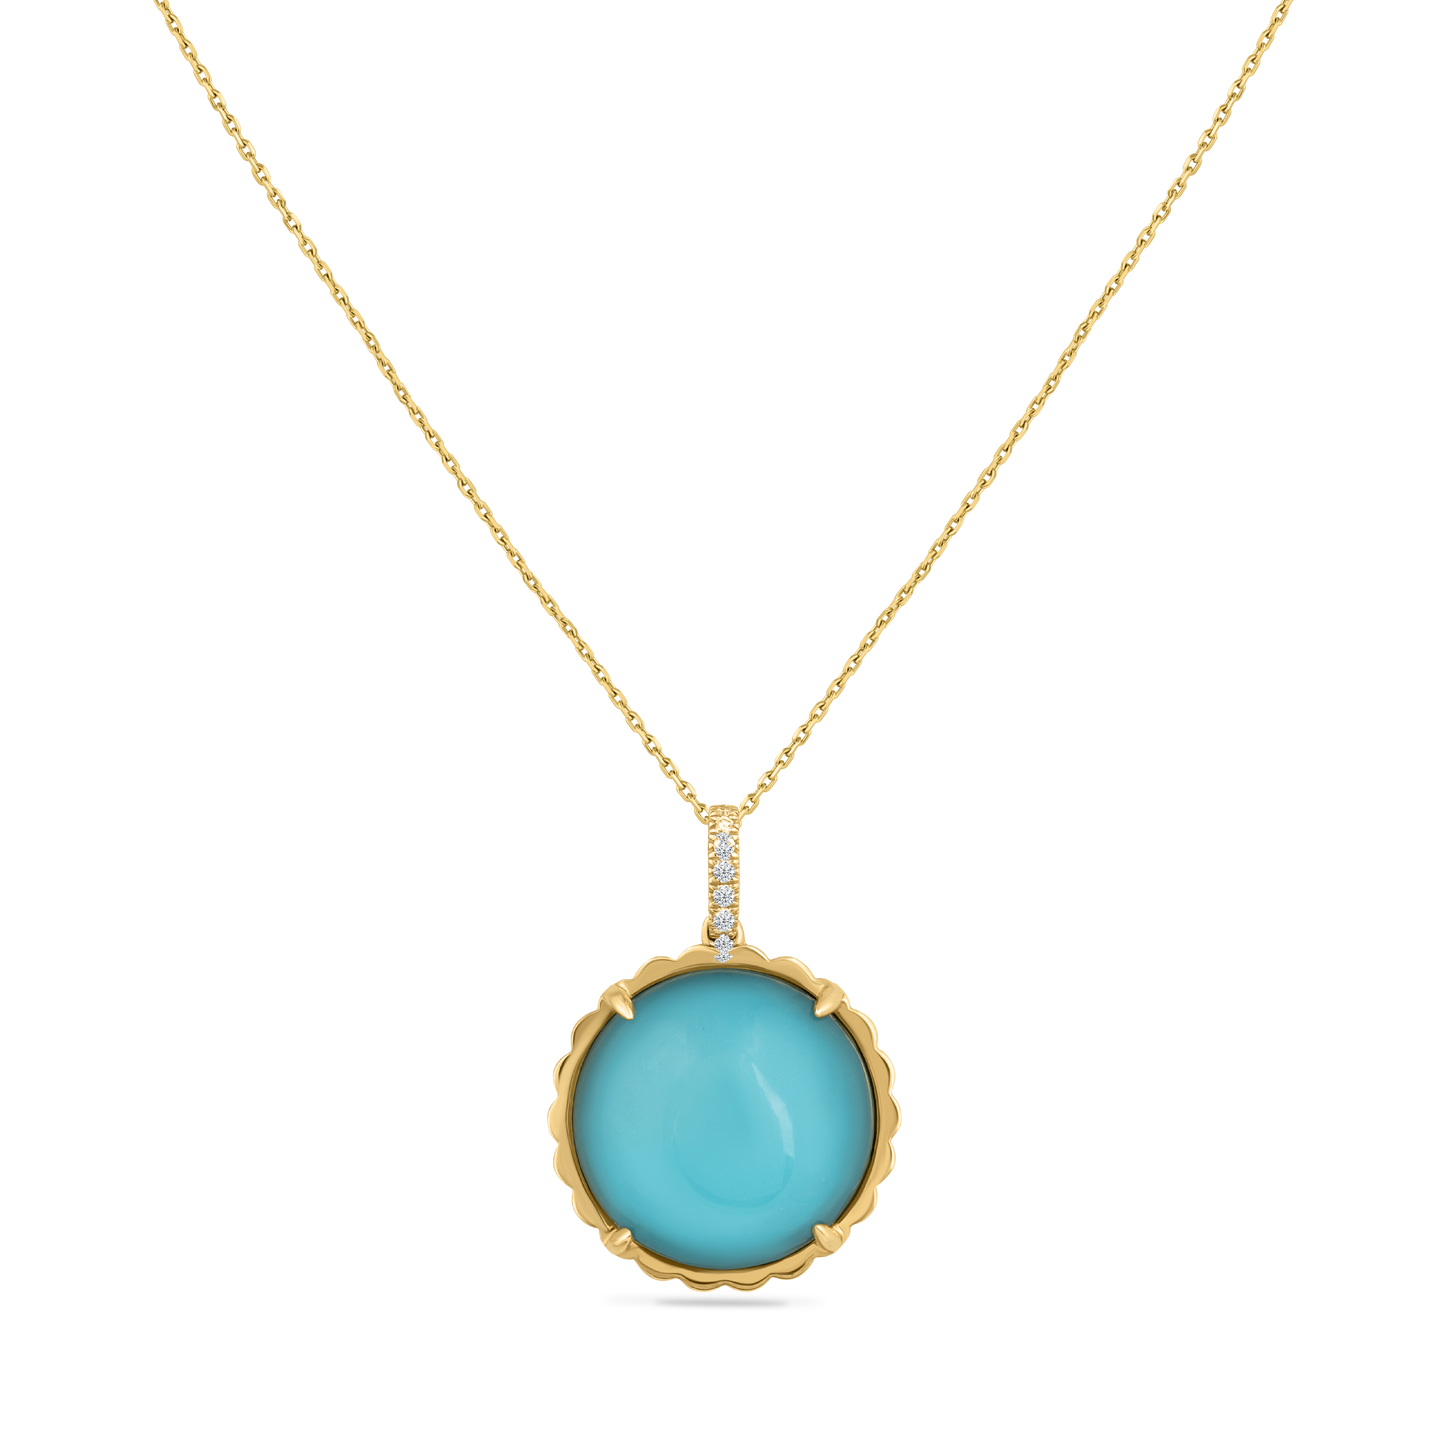 14K PENDANT WITH 11 DIAMONDS 0.07CT, WHITE TOPAZ & DOUBLET TURQUOISE ON 18 INCHES CHAIN